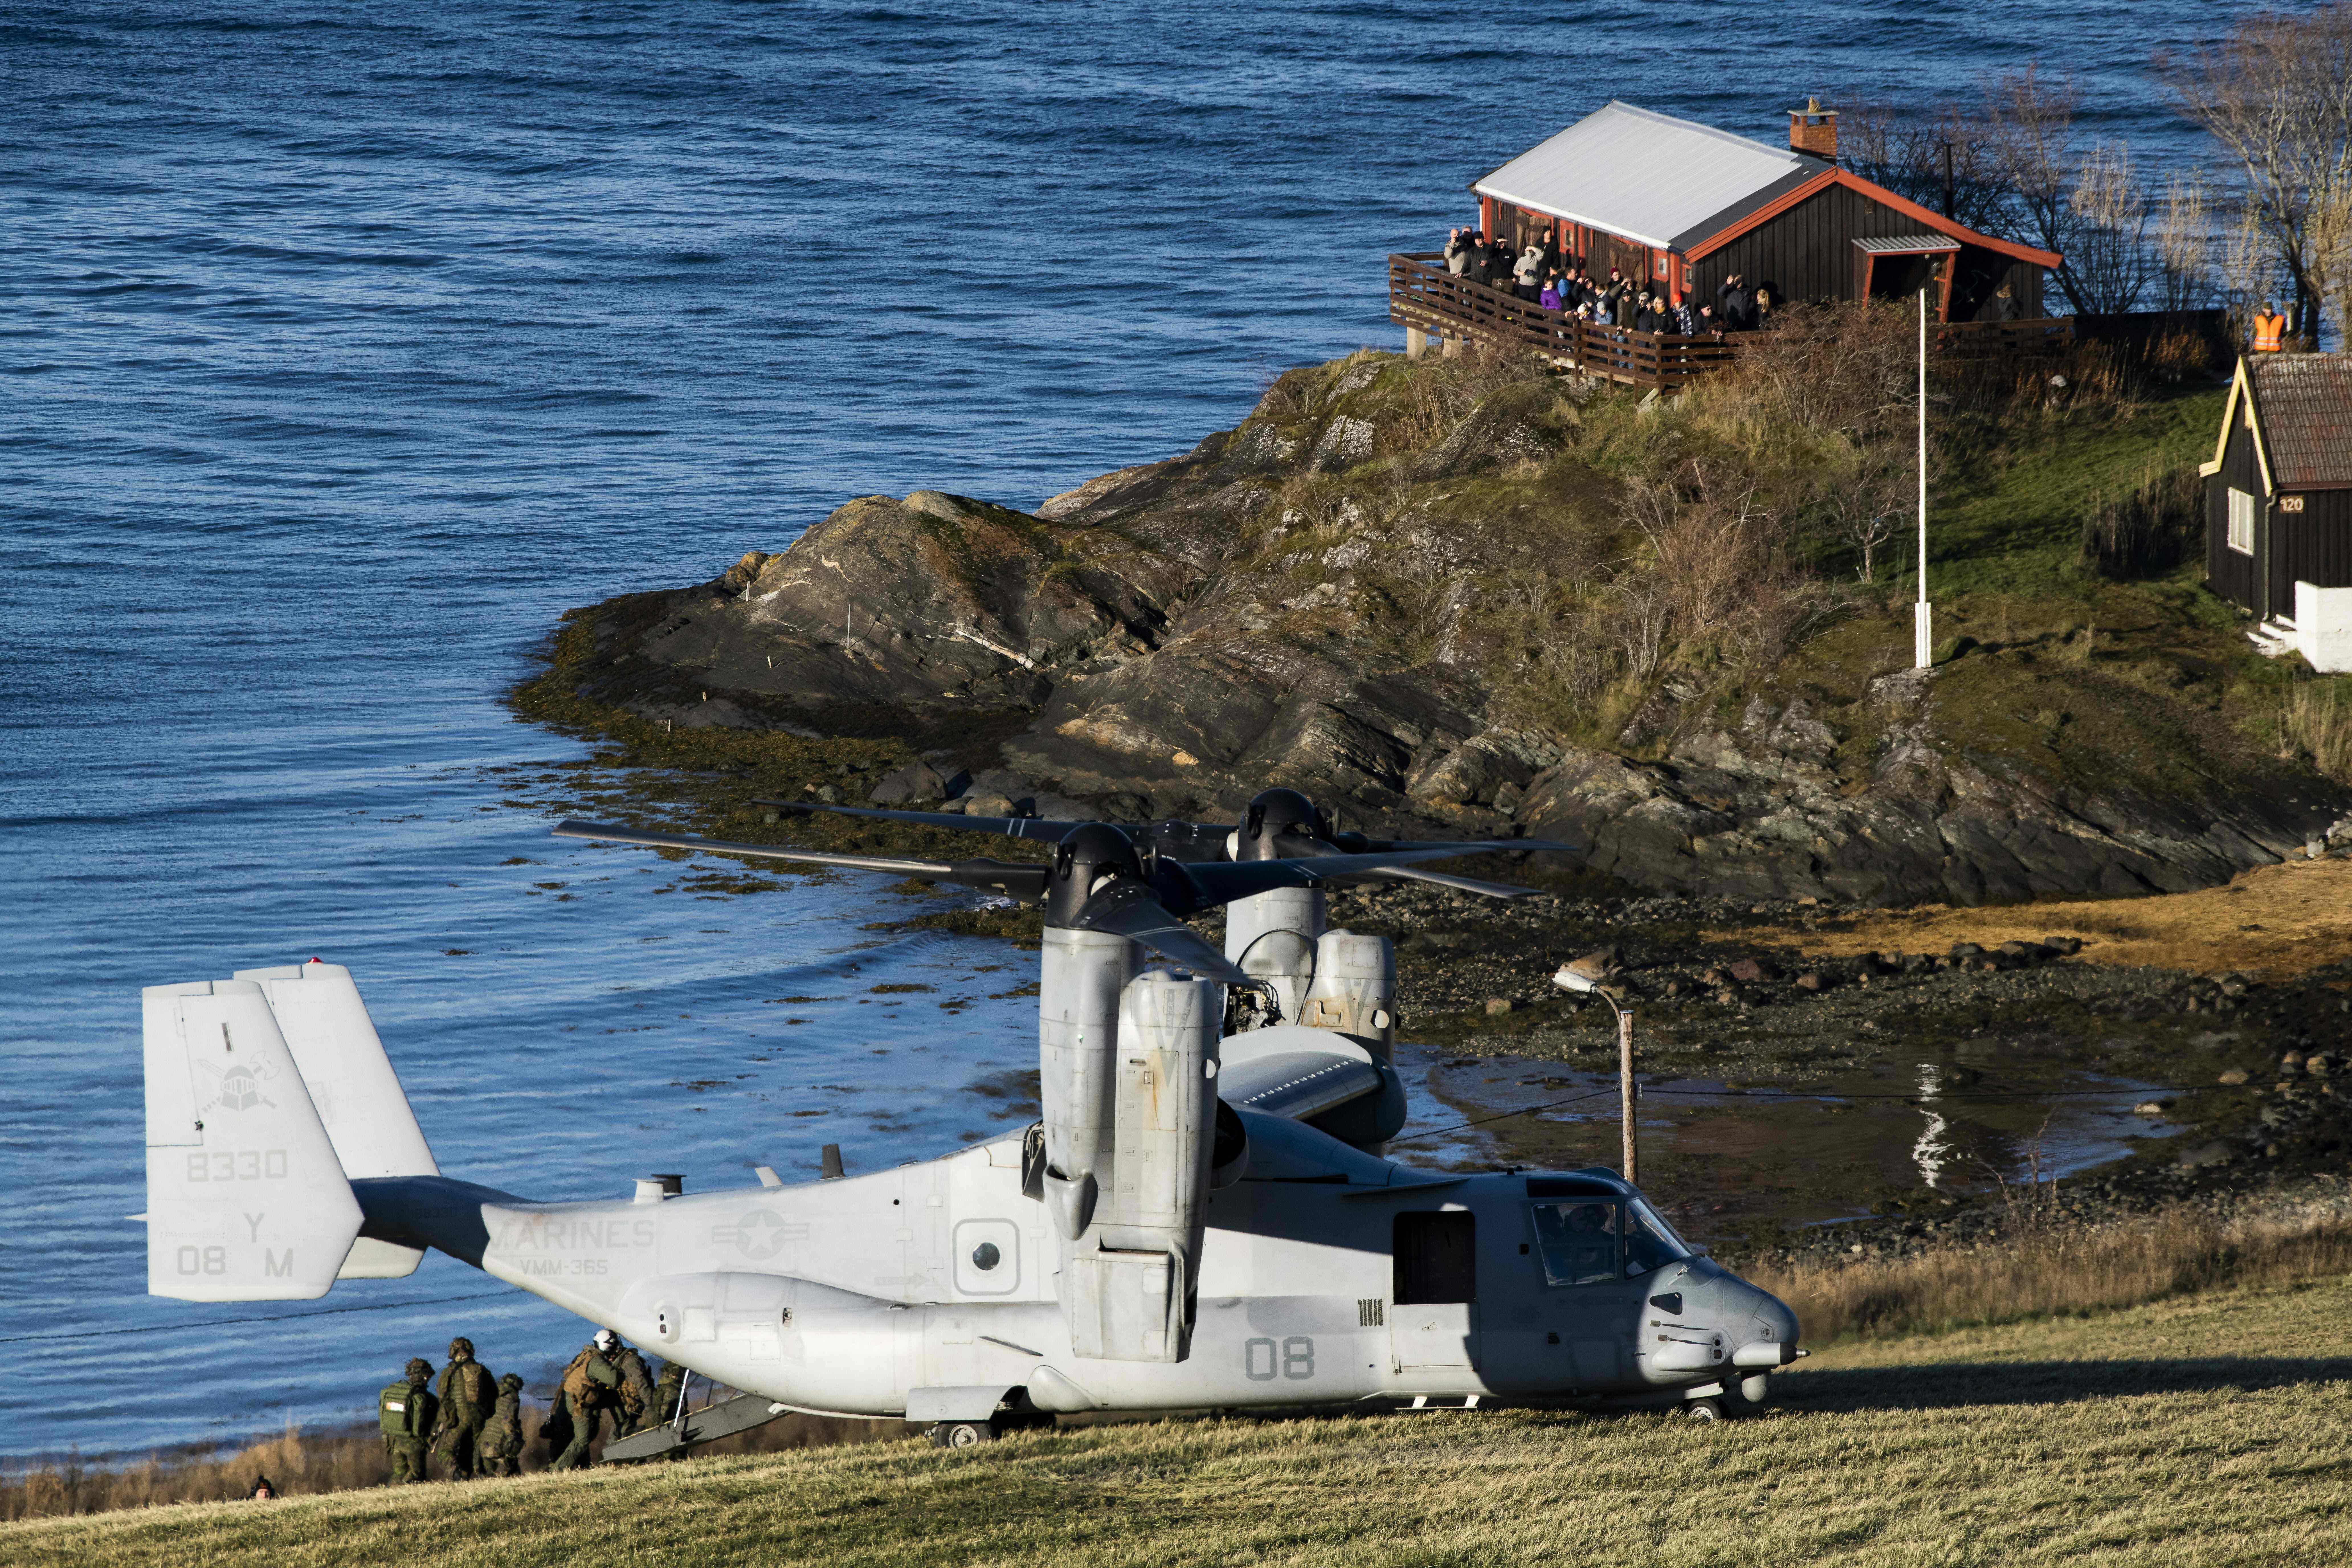 A United States' V-22 Osprey, a multi-mission, tiltrotor military aircraft with both vertical takeoff and landing, lands to pick up Marines during a joint demonstration as part of the NATO Trident Juncture 2018 exercise in Byneset near Trondheim, Norway, October 30, 2018.